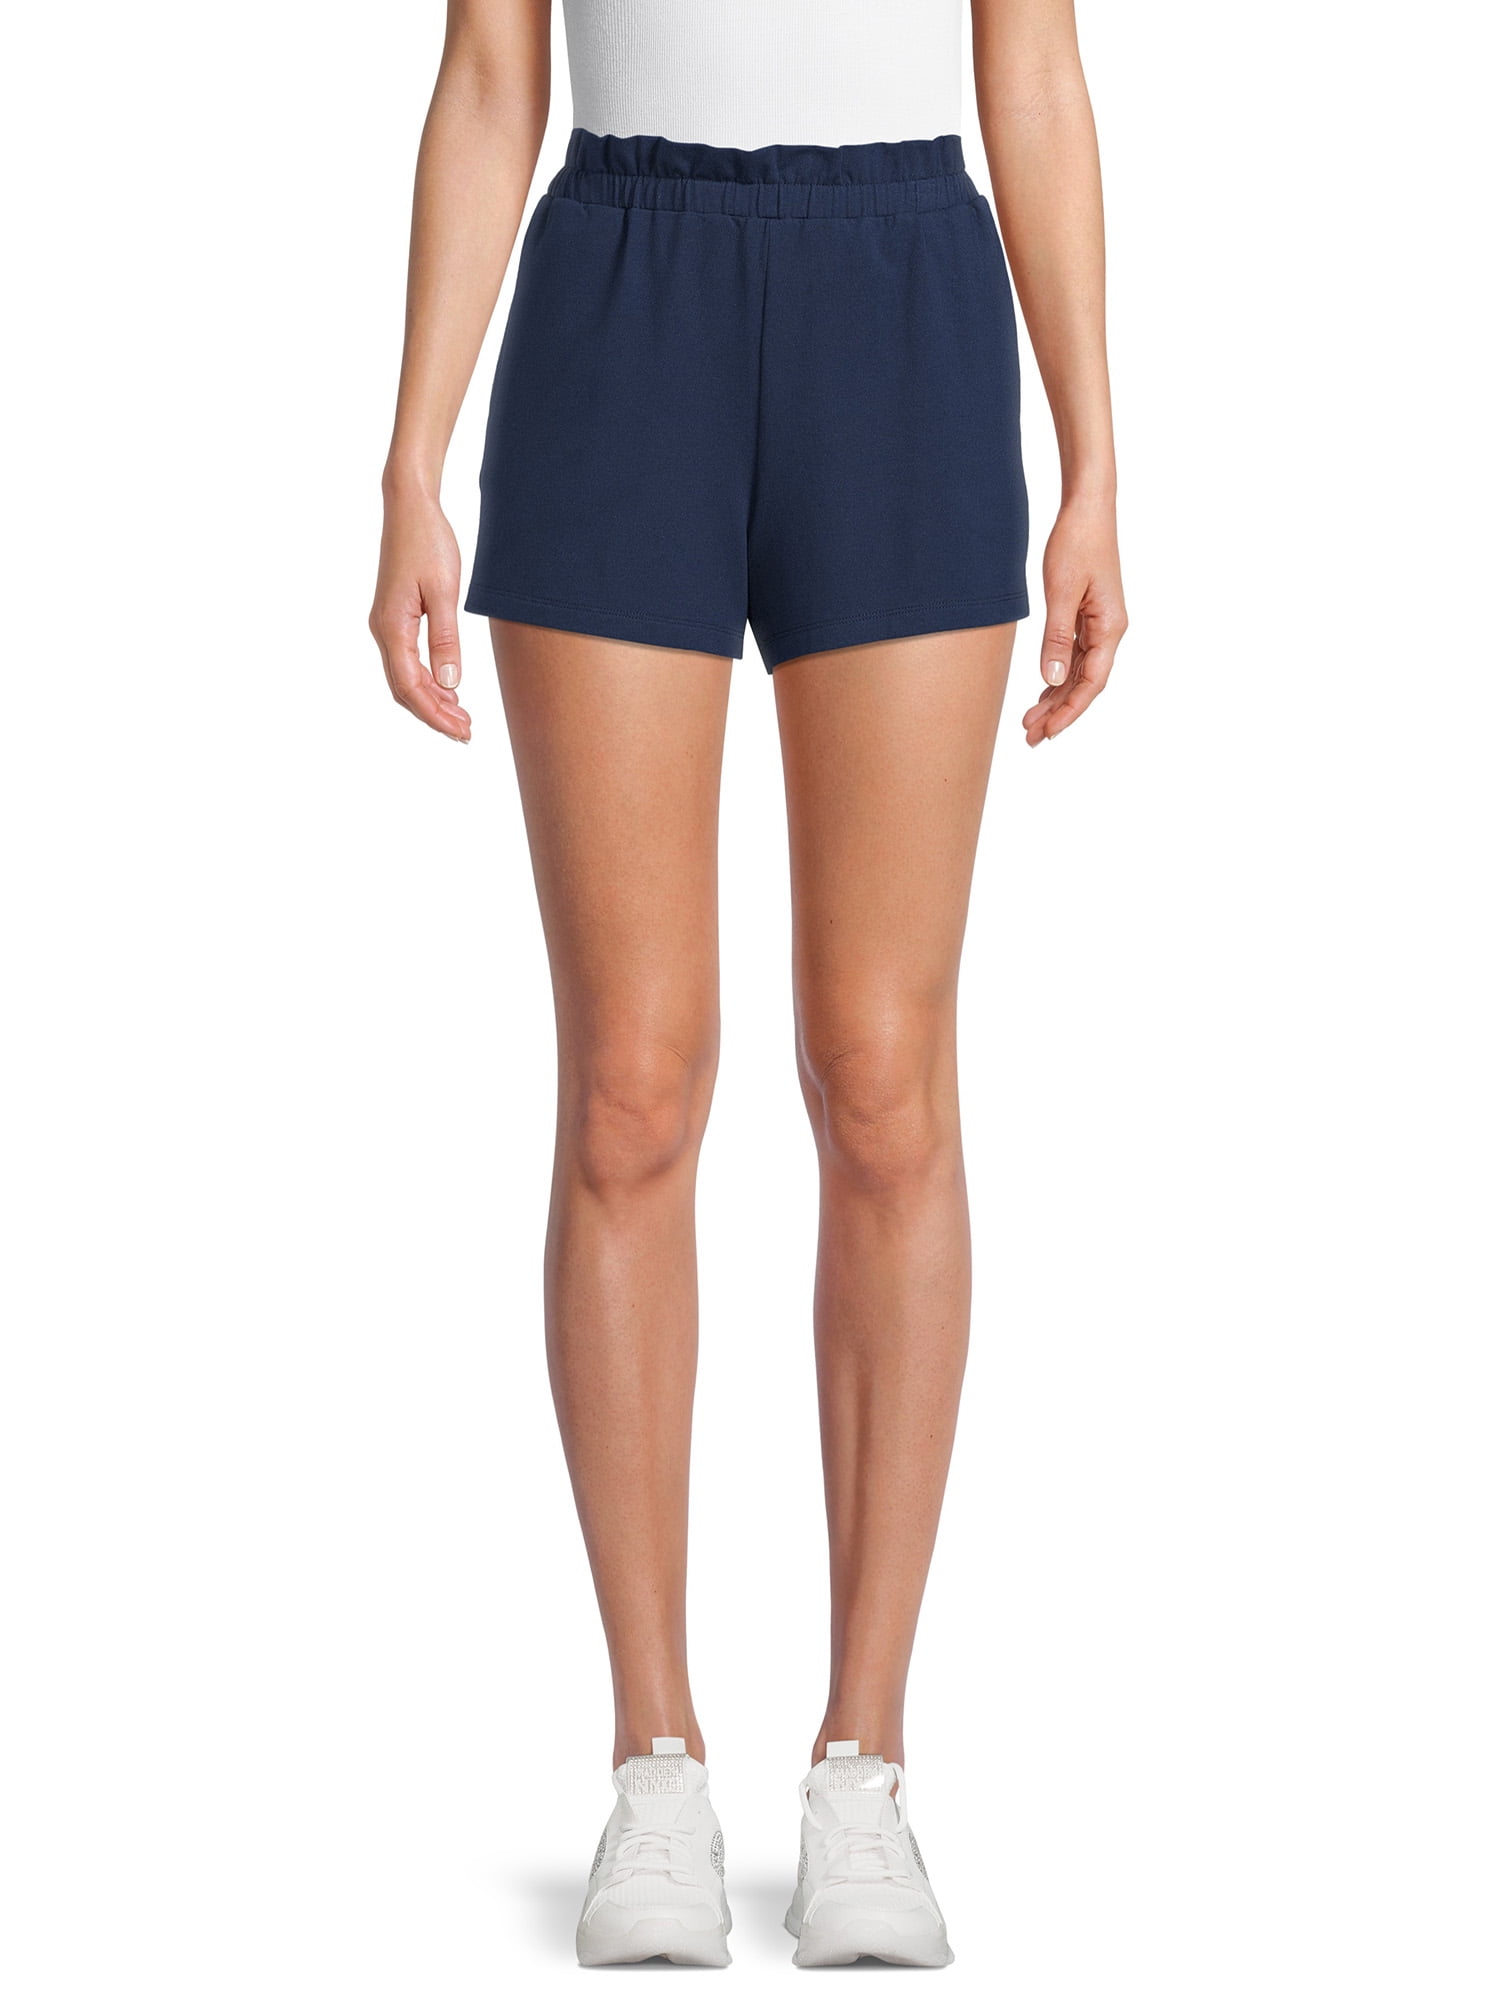 Athletic Works Women's Athleisure Pull On Shorts